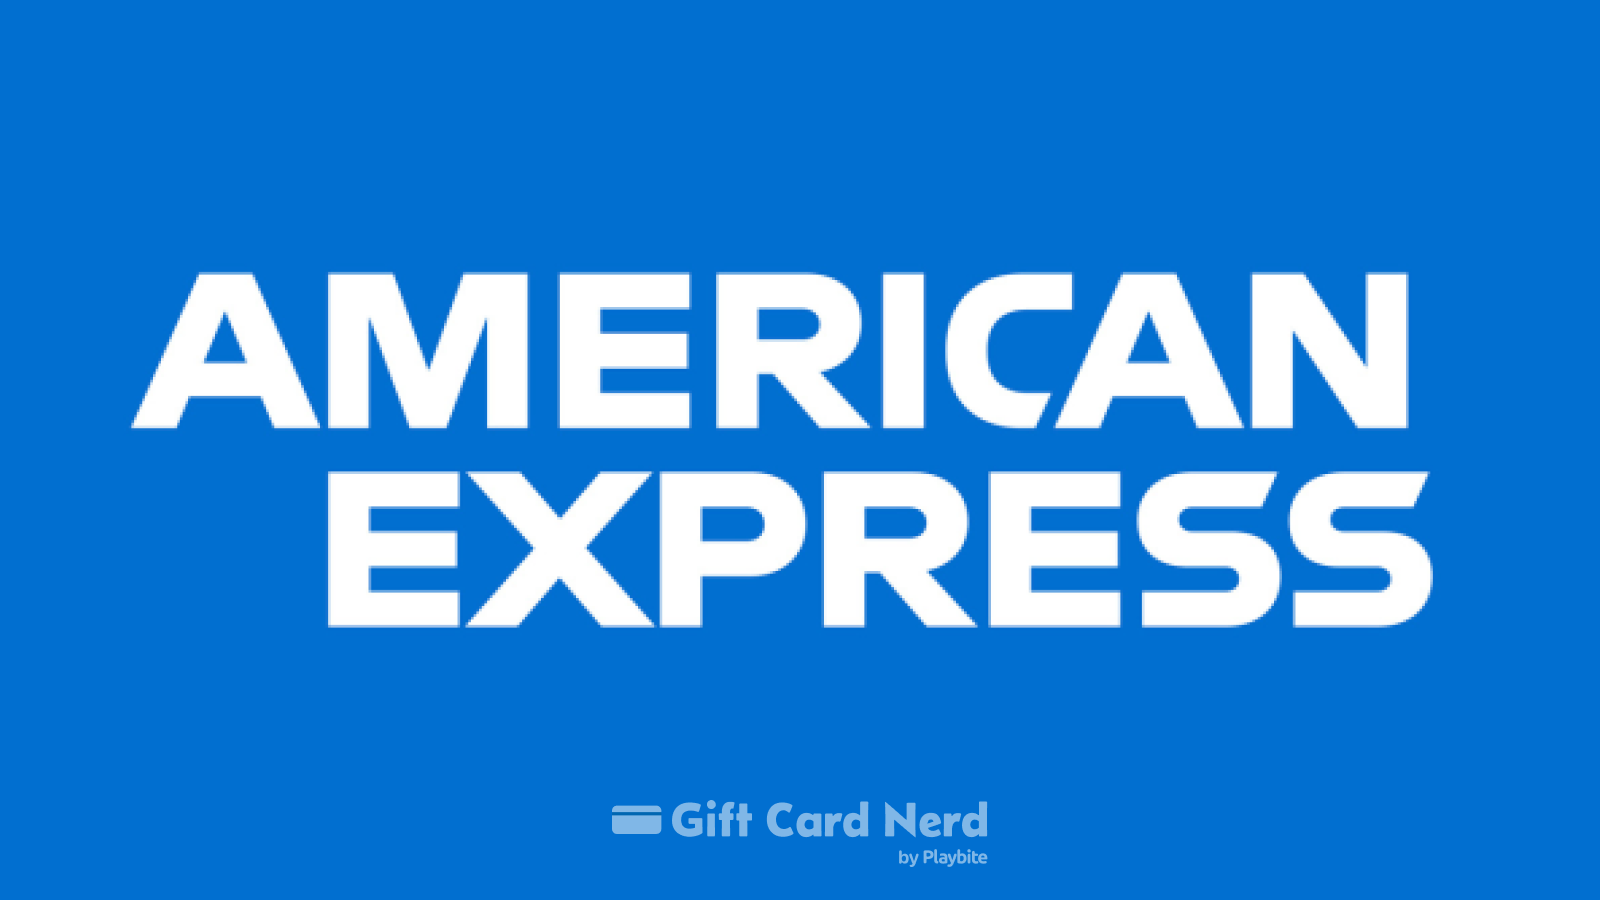 Does Amazon Sell Amex Gift Cards?